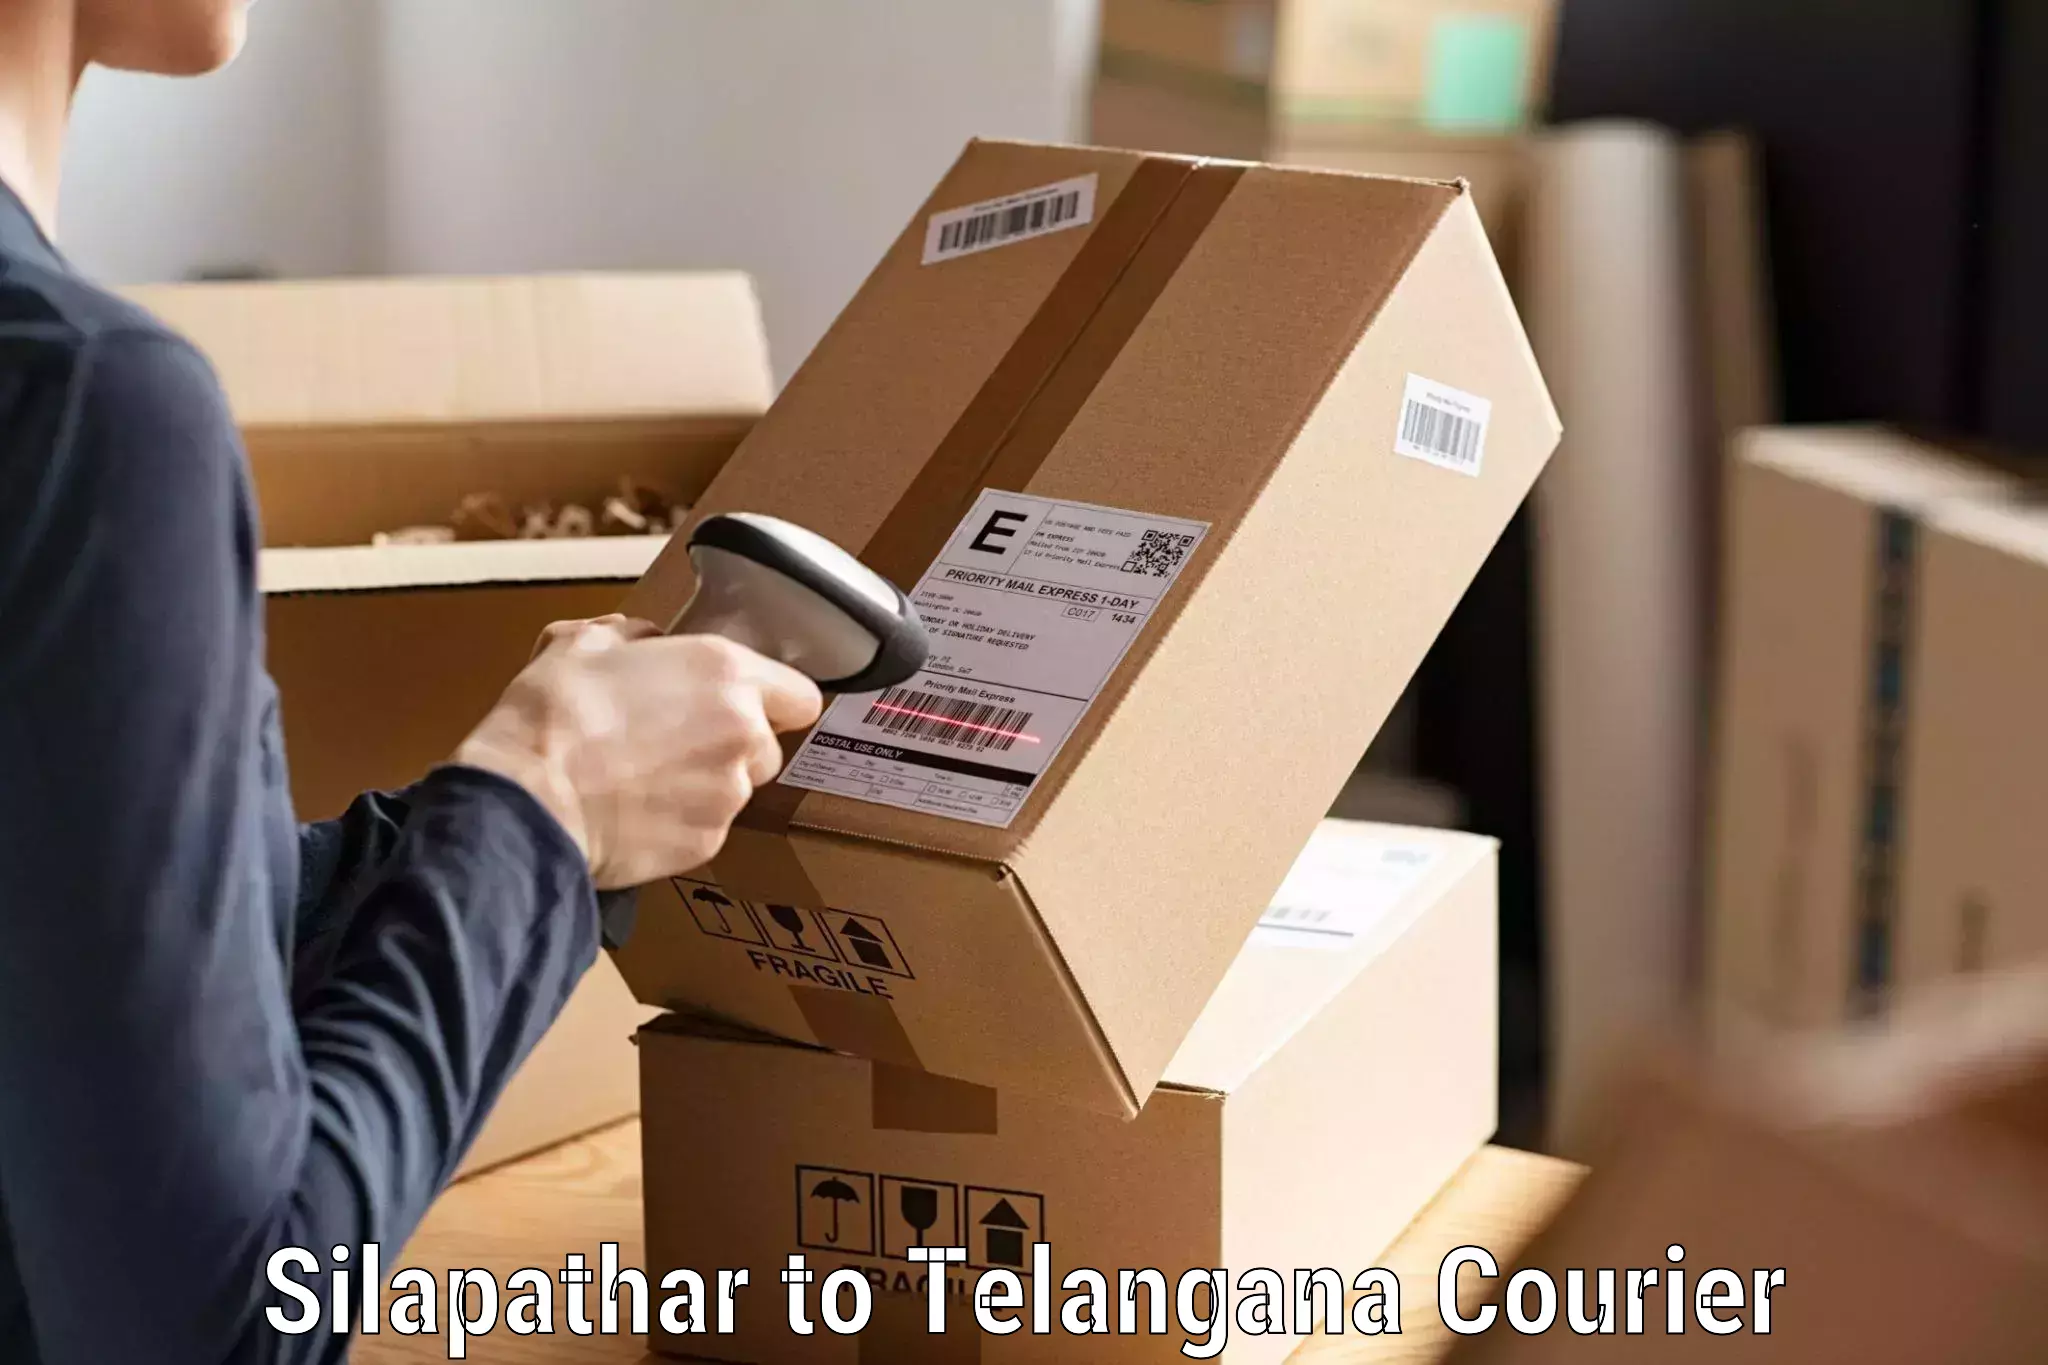 Express mail solutions Silapathar to Tallada